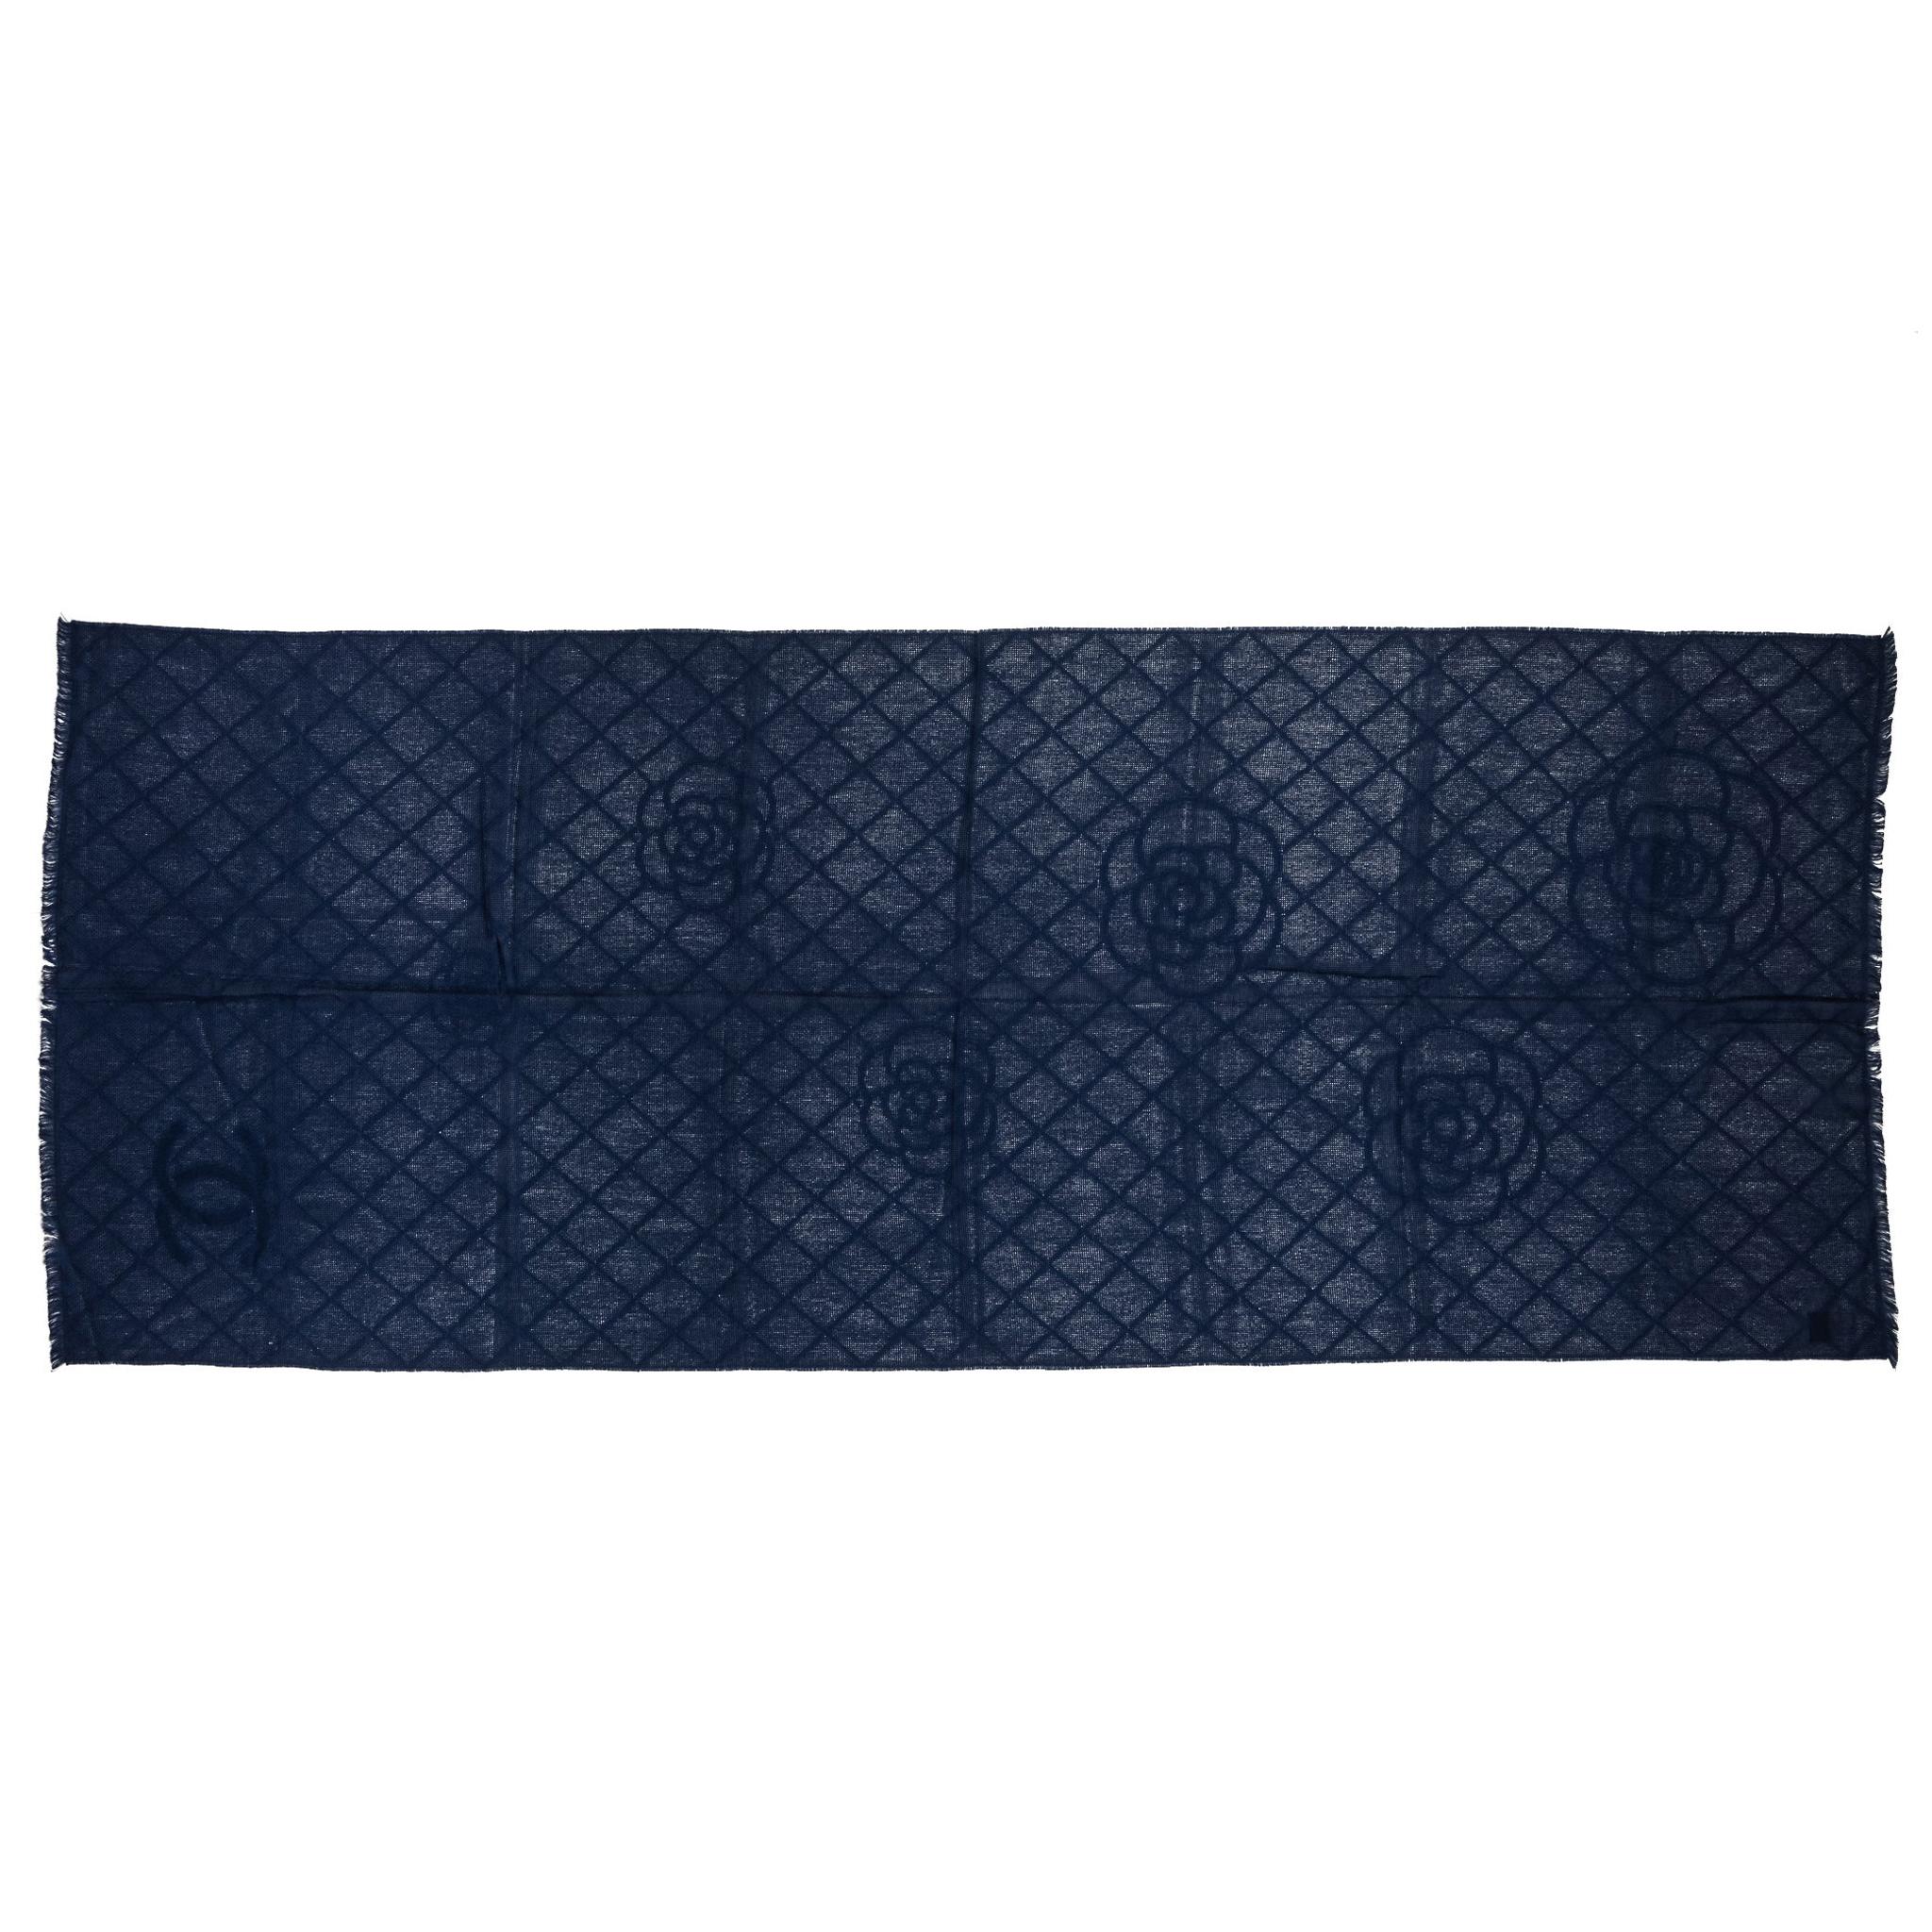 New Chanel Navy Cashmere Camellia Flower Shawl For Sale